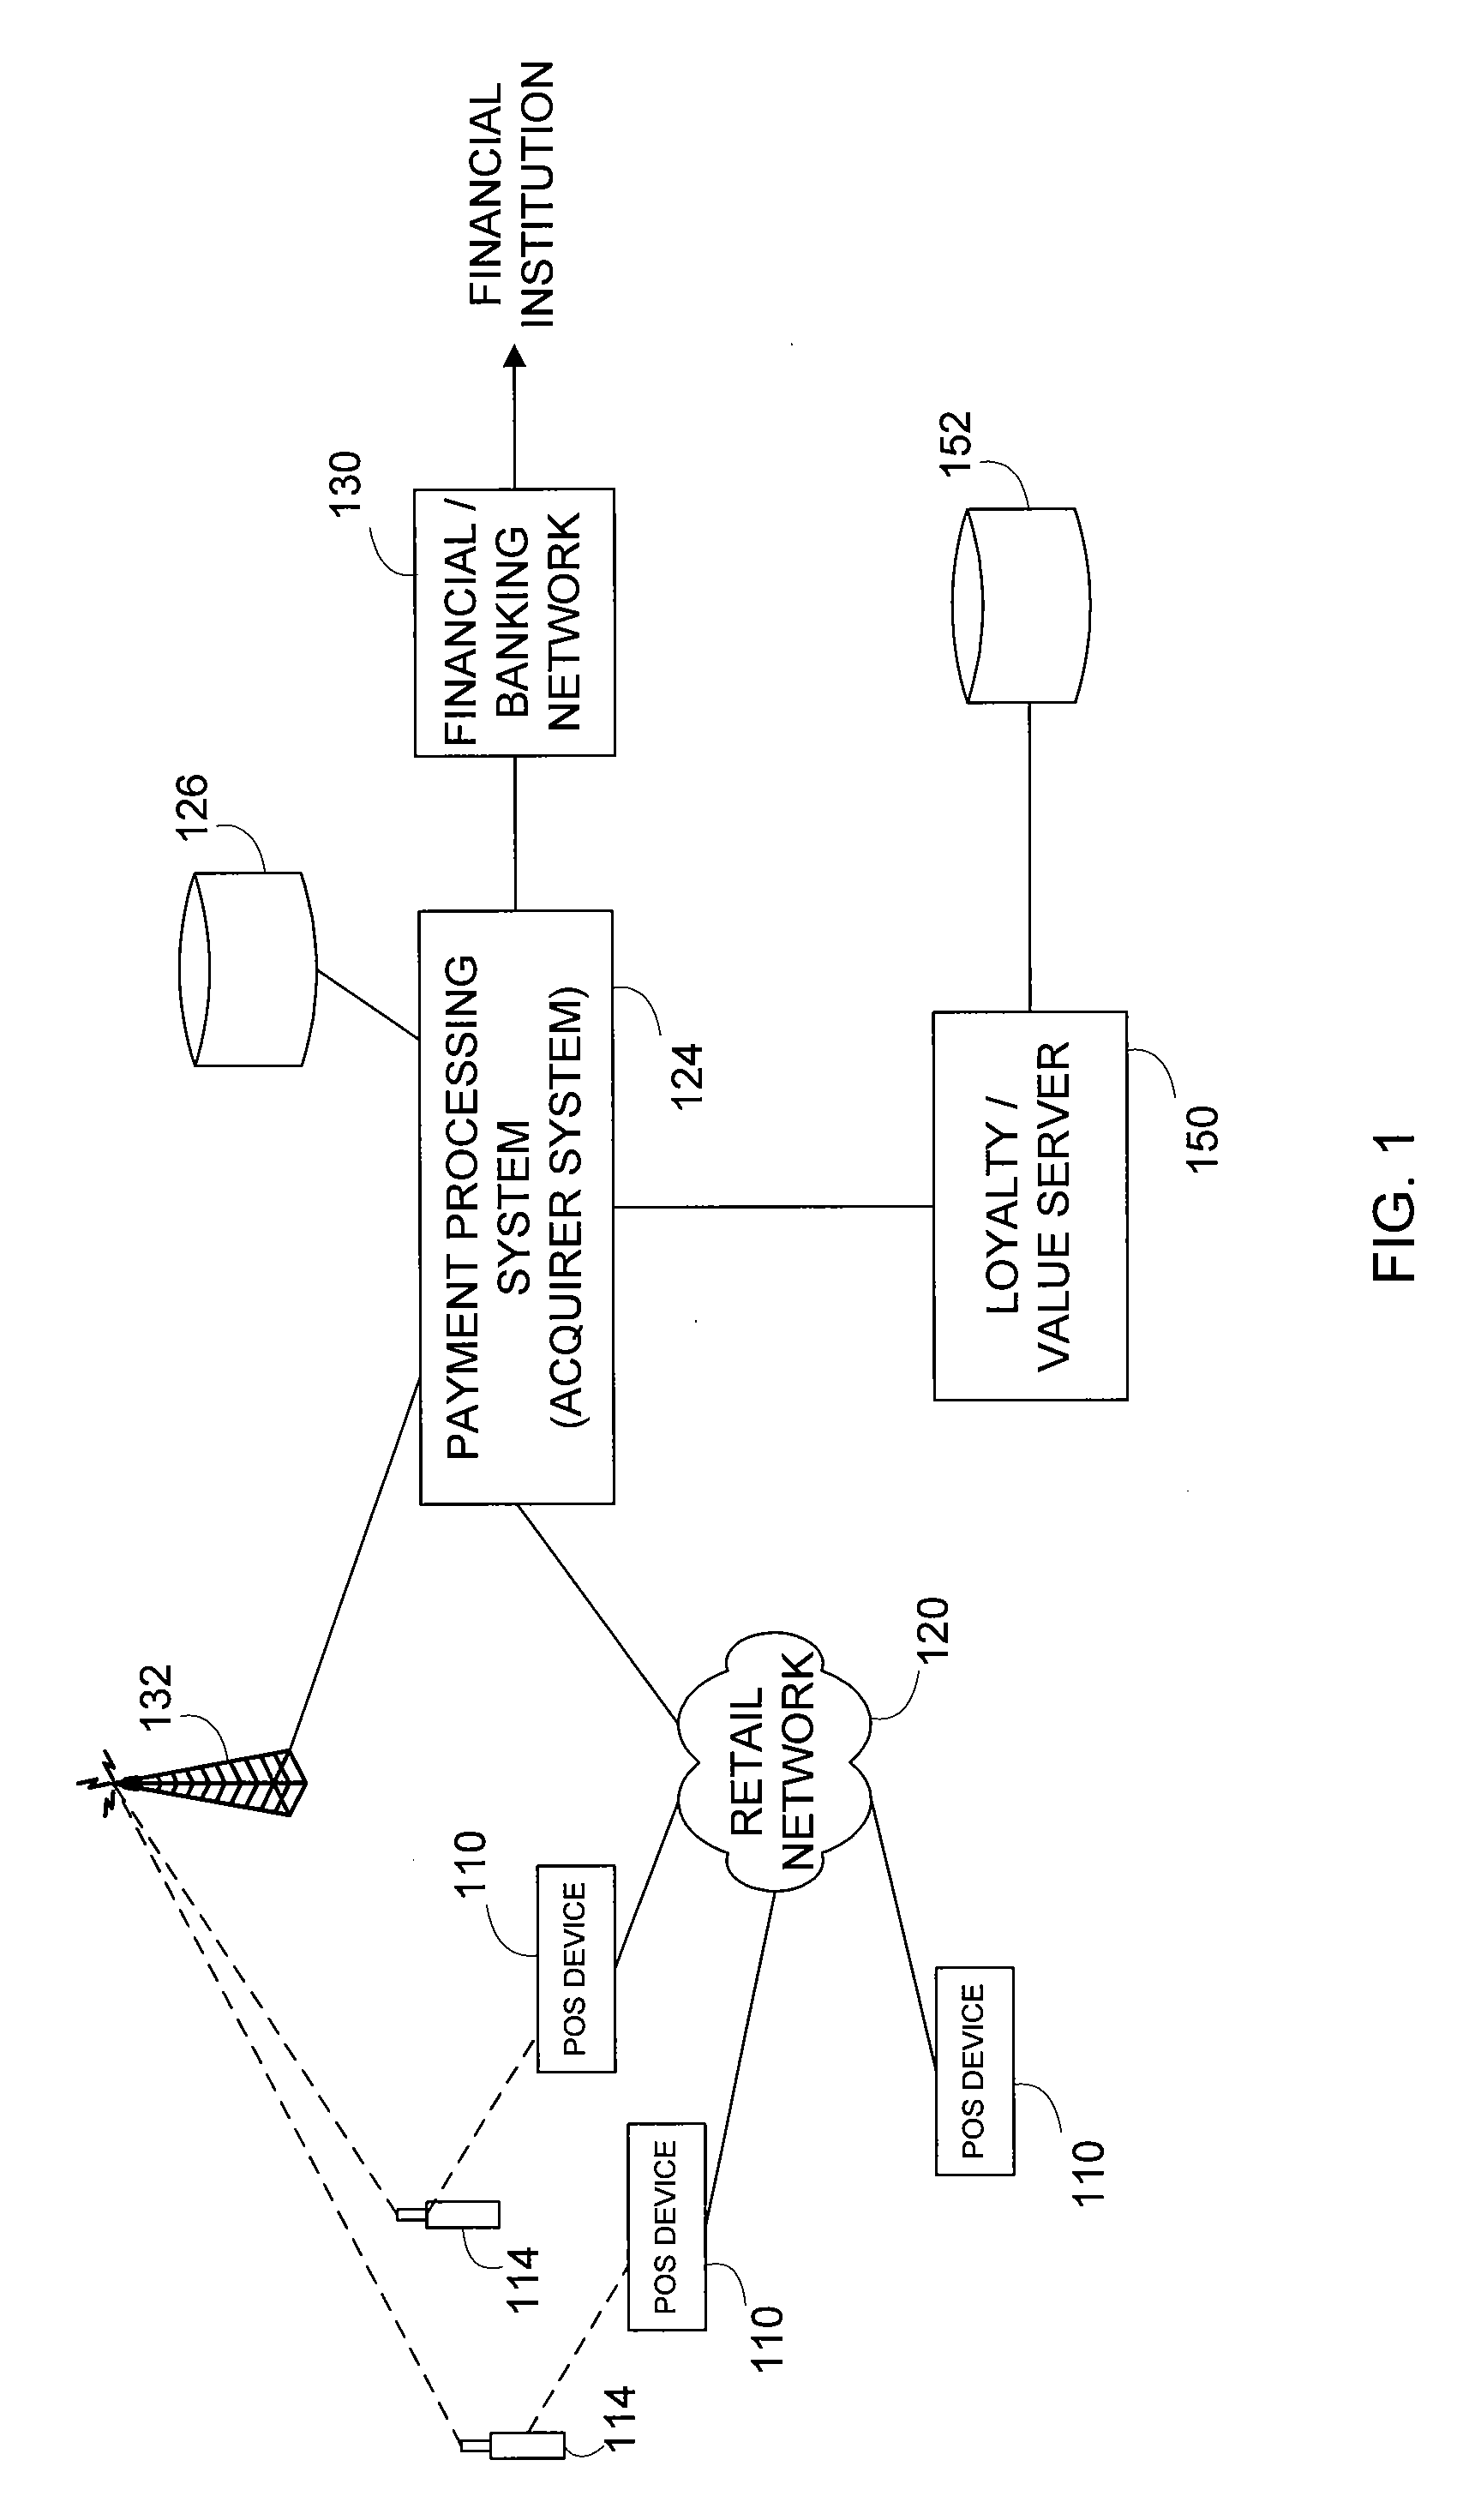 Mobile system and method for exchanging point value